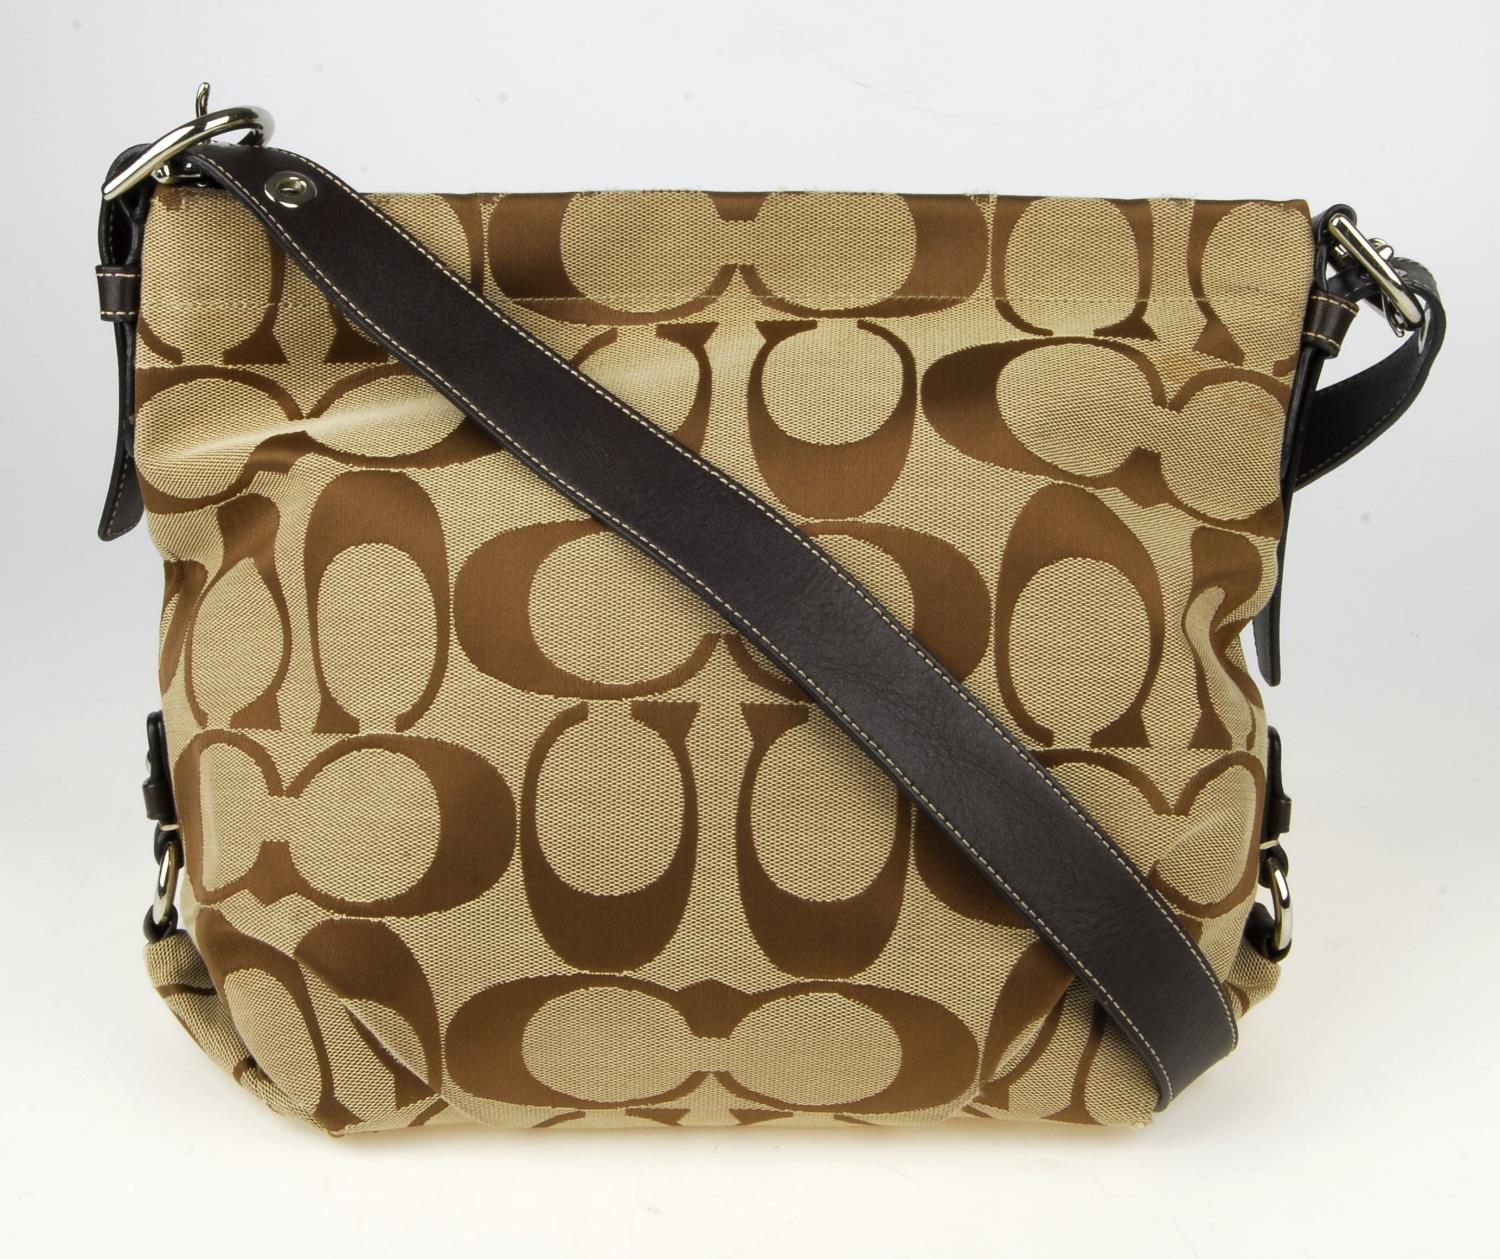 COACH - two Monogram canvas handbags. To include a large canvas handbag with front zip pocket, ad